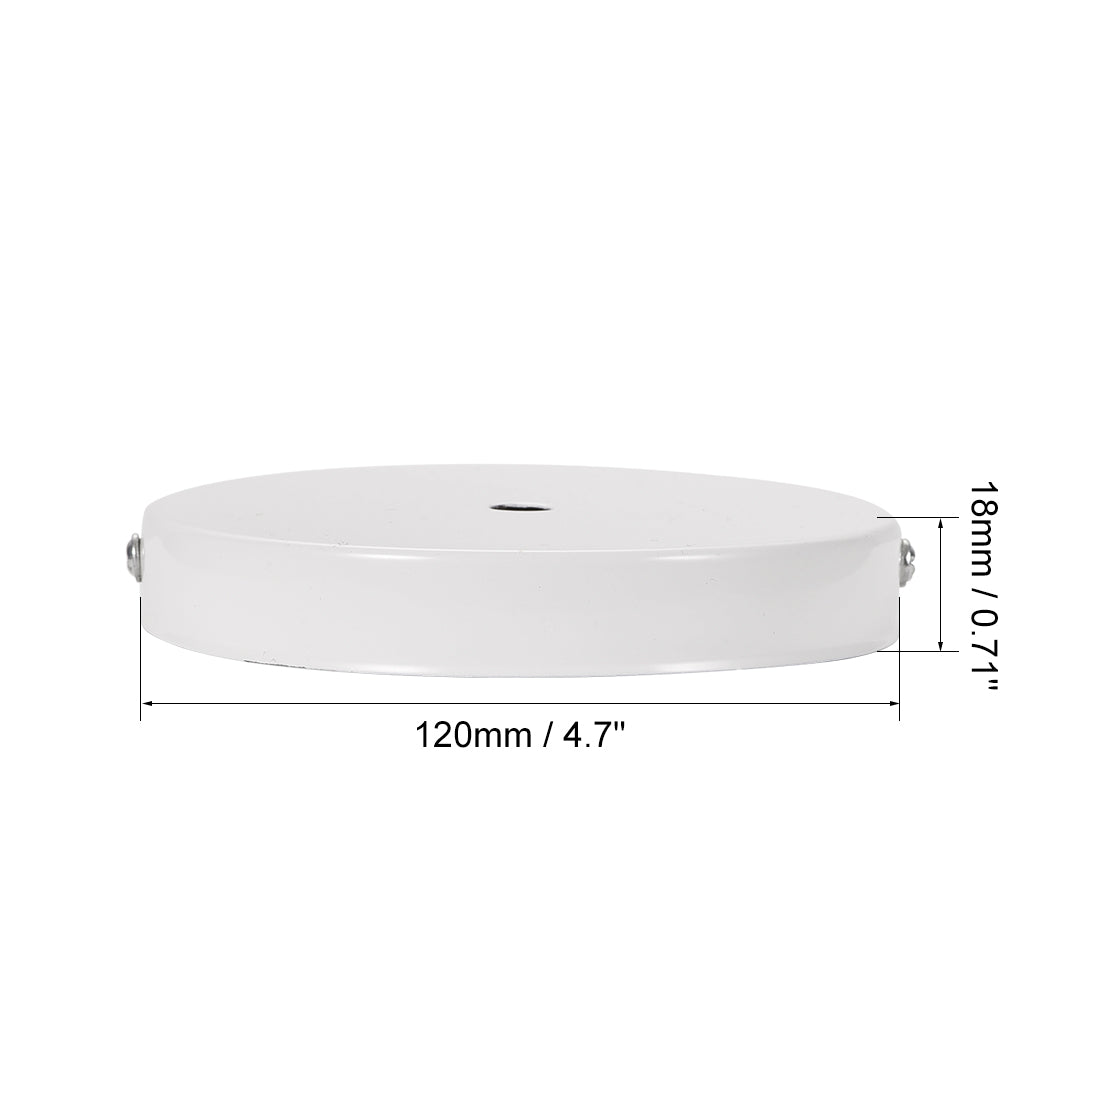 uxcell Uxcell Retro Light Canopy Kit Wall Sconce Lamp Plate Fixture 120mm 4.7Inch White